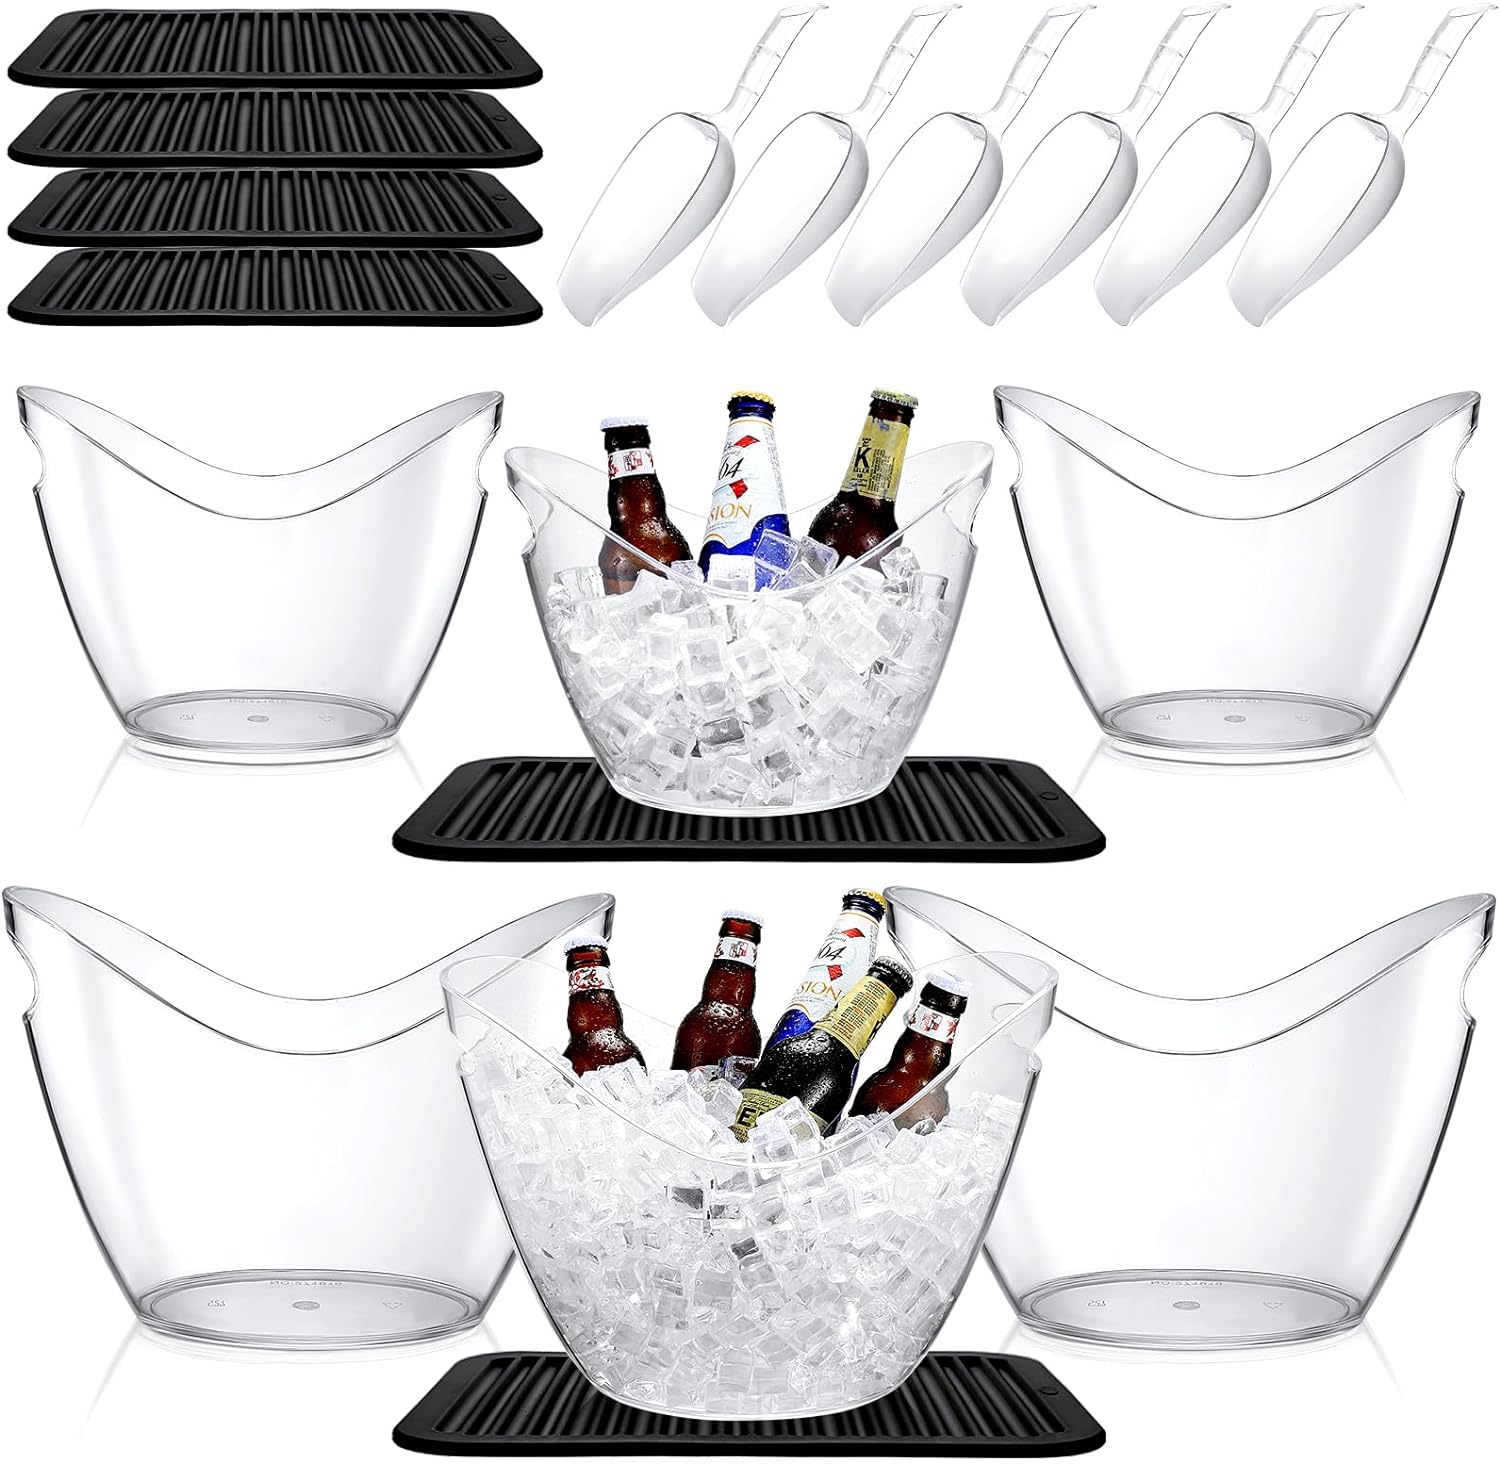 Umigy 18 Pcs Ice Bucket 8L and 4L Beverage Tub Champagne Wine Bucket with Ice Scoops and Insulated Mats for Parties and Drinks Plastic Clear Acrylic Ice Tub for Bar Champagne Wine or Beer Bottle